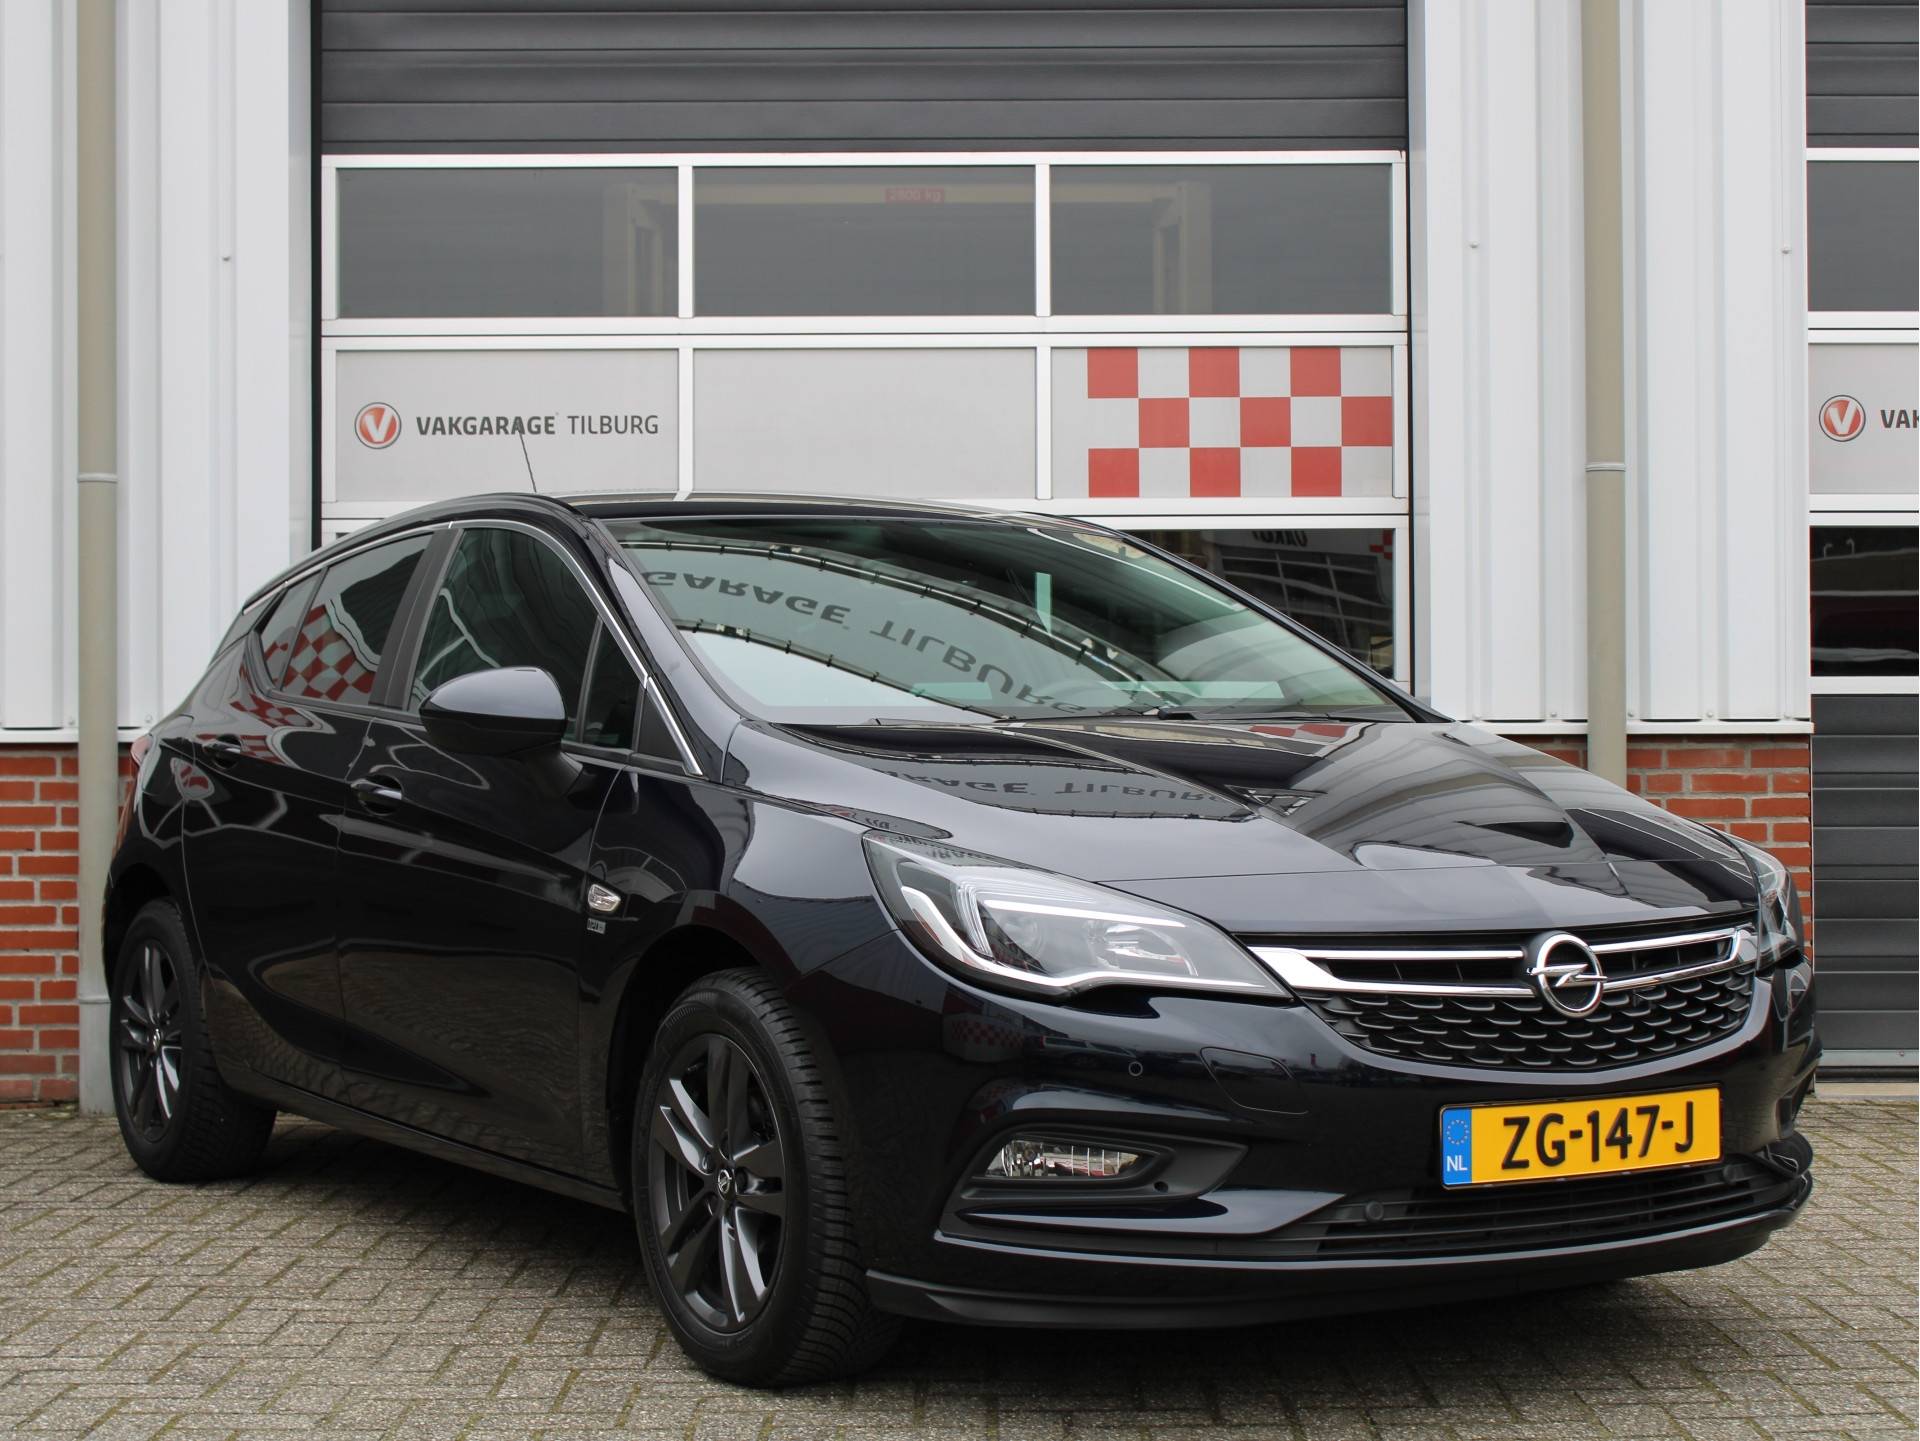 Opel Astra 1.4 Turbo 120Jaar Edition 150PK Automaat /NAVI/PDC/Climate/Cruise control/DAB+/LED/Apple carplay/Android auto/Donker glas/NAP! 1e eig! - 5/41